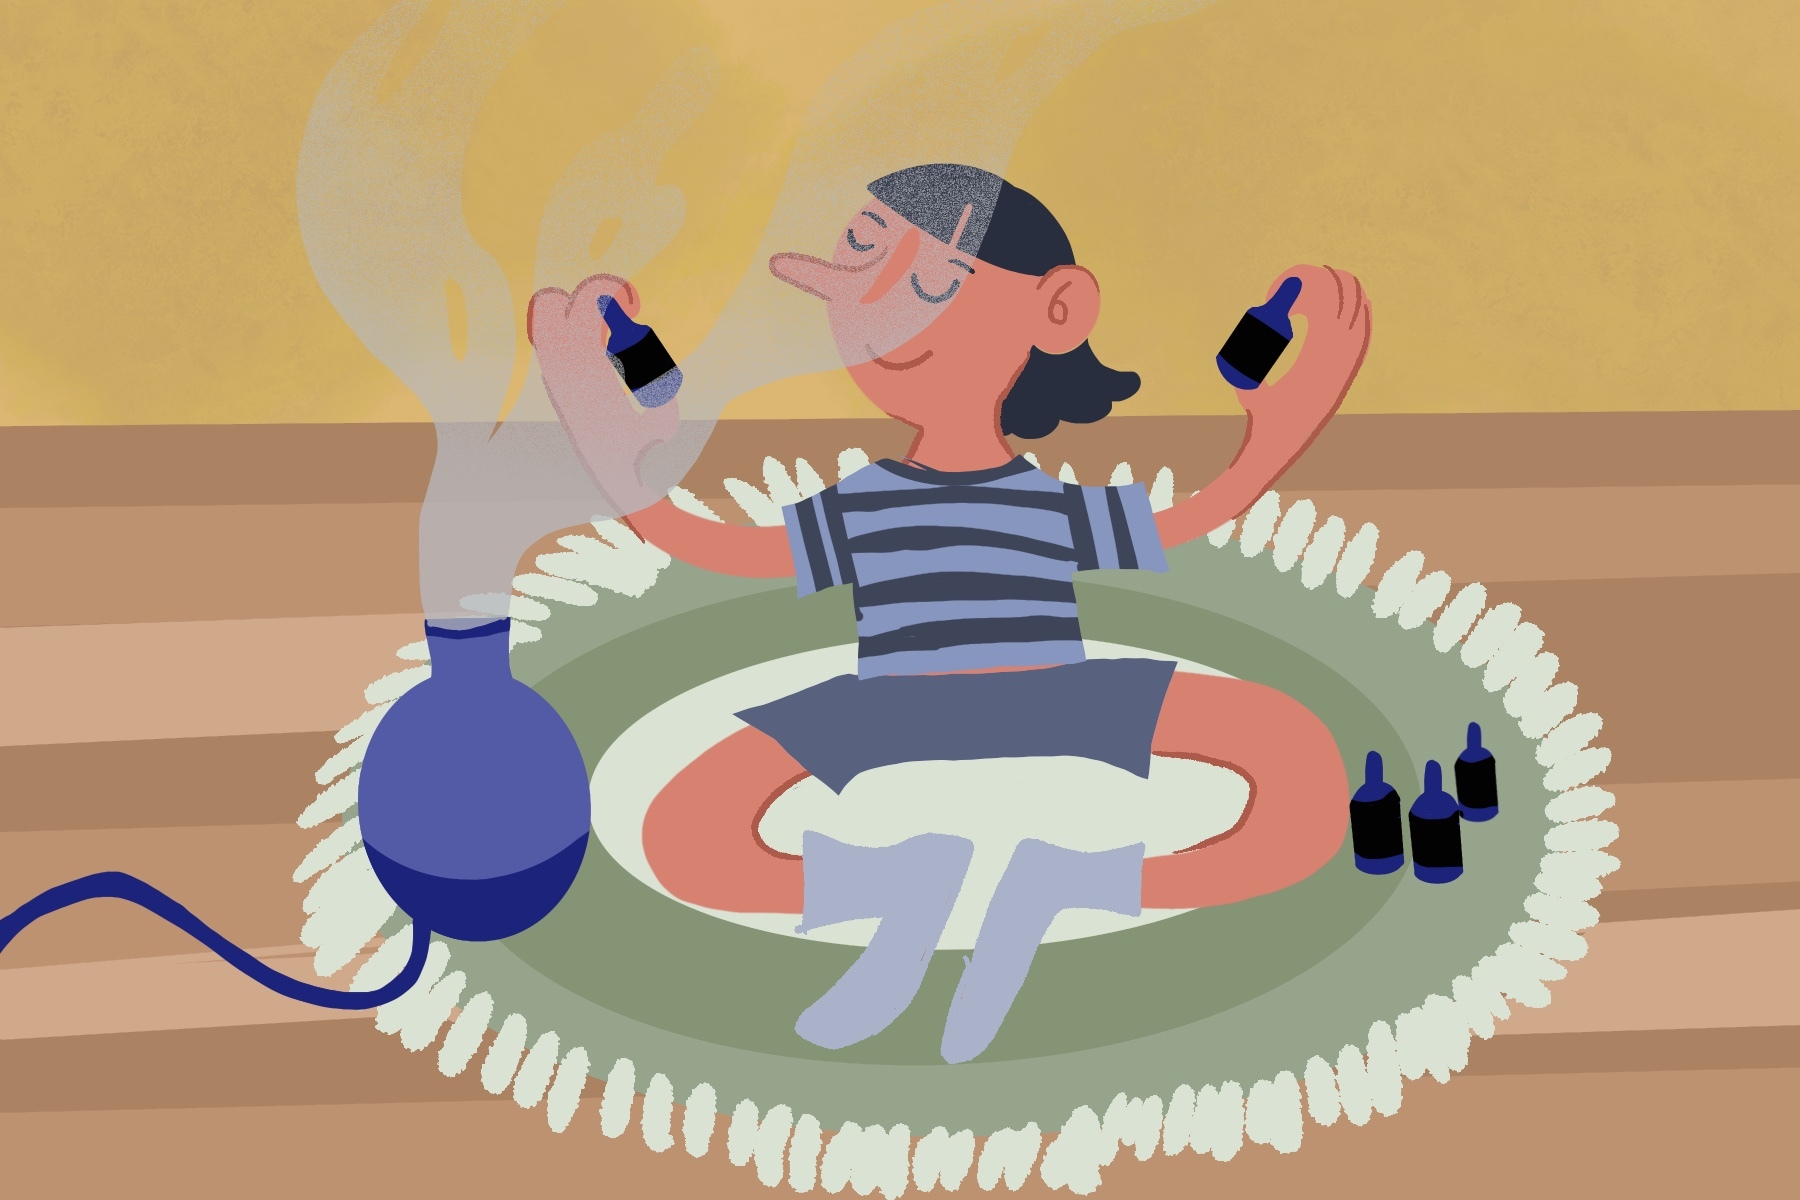 person sitting on rug doing aromatherapy